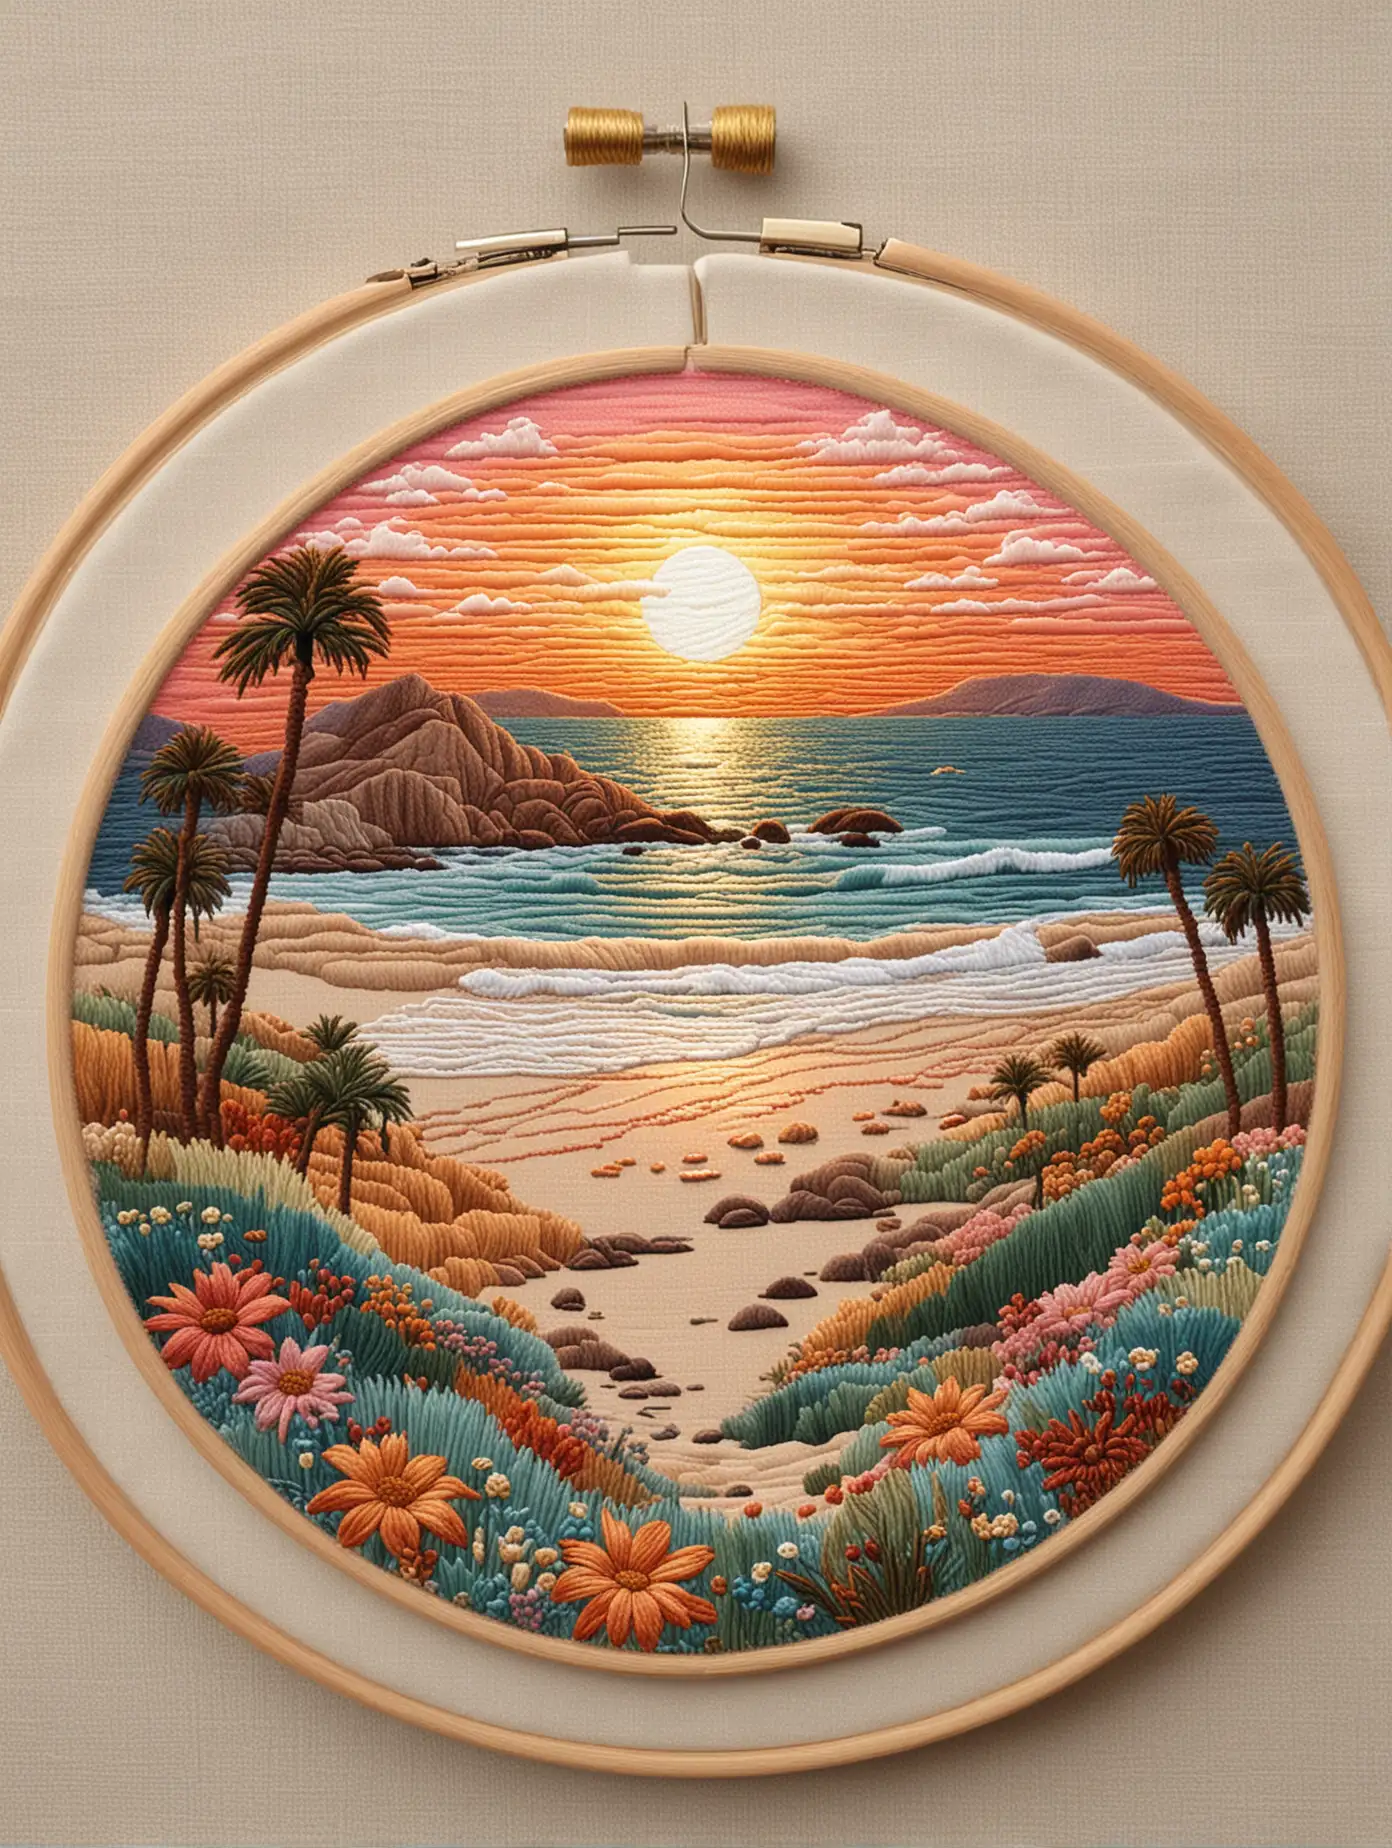 fully embroidered design of a California beach sunset made in the style of folk embroidery art, thread only no paint, subtle faded colors